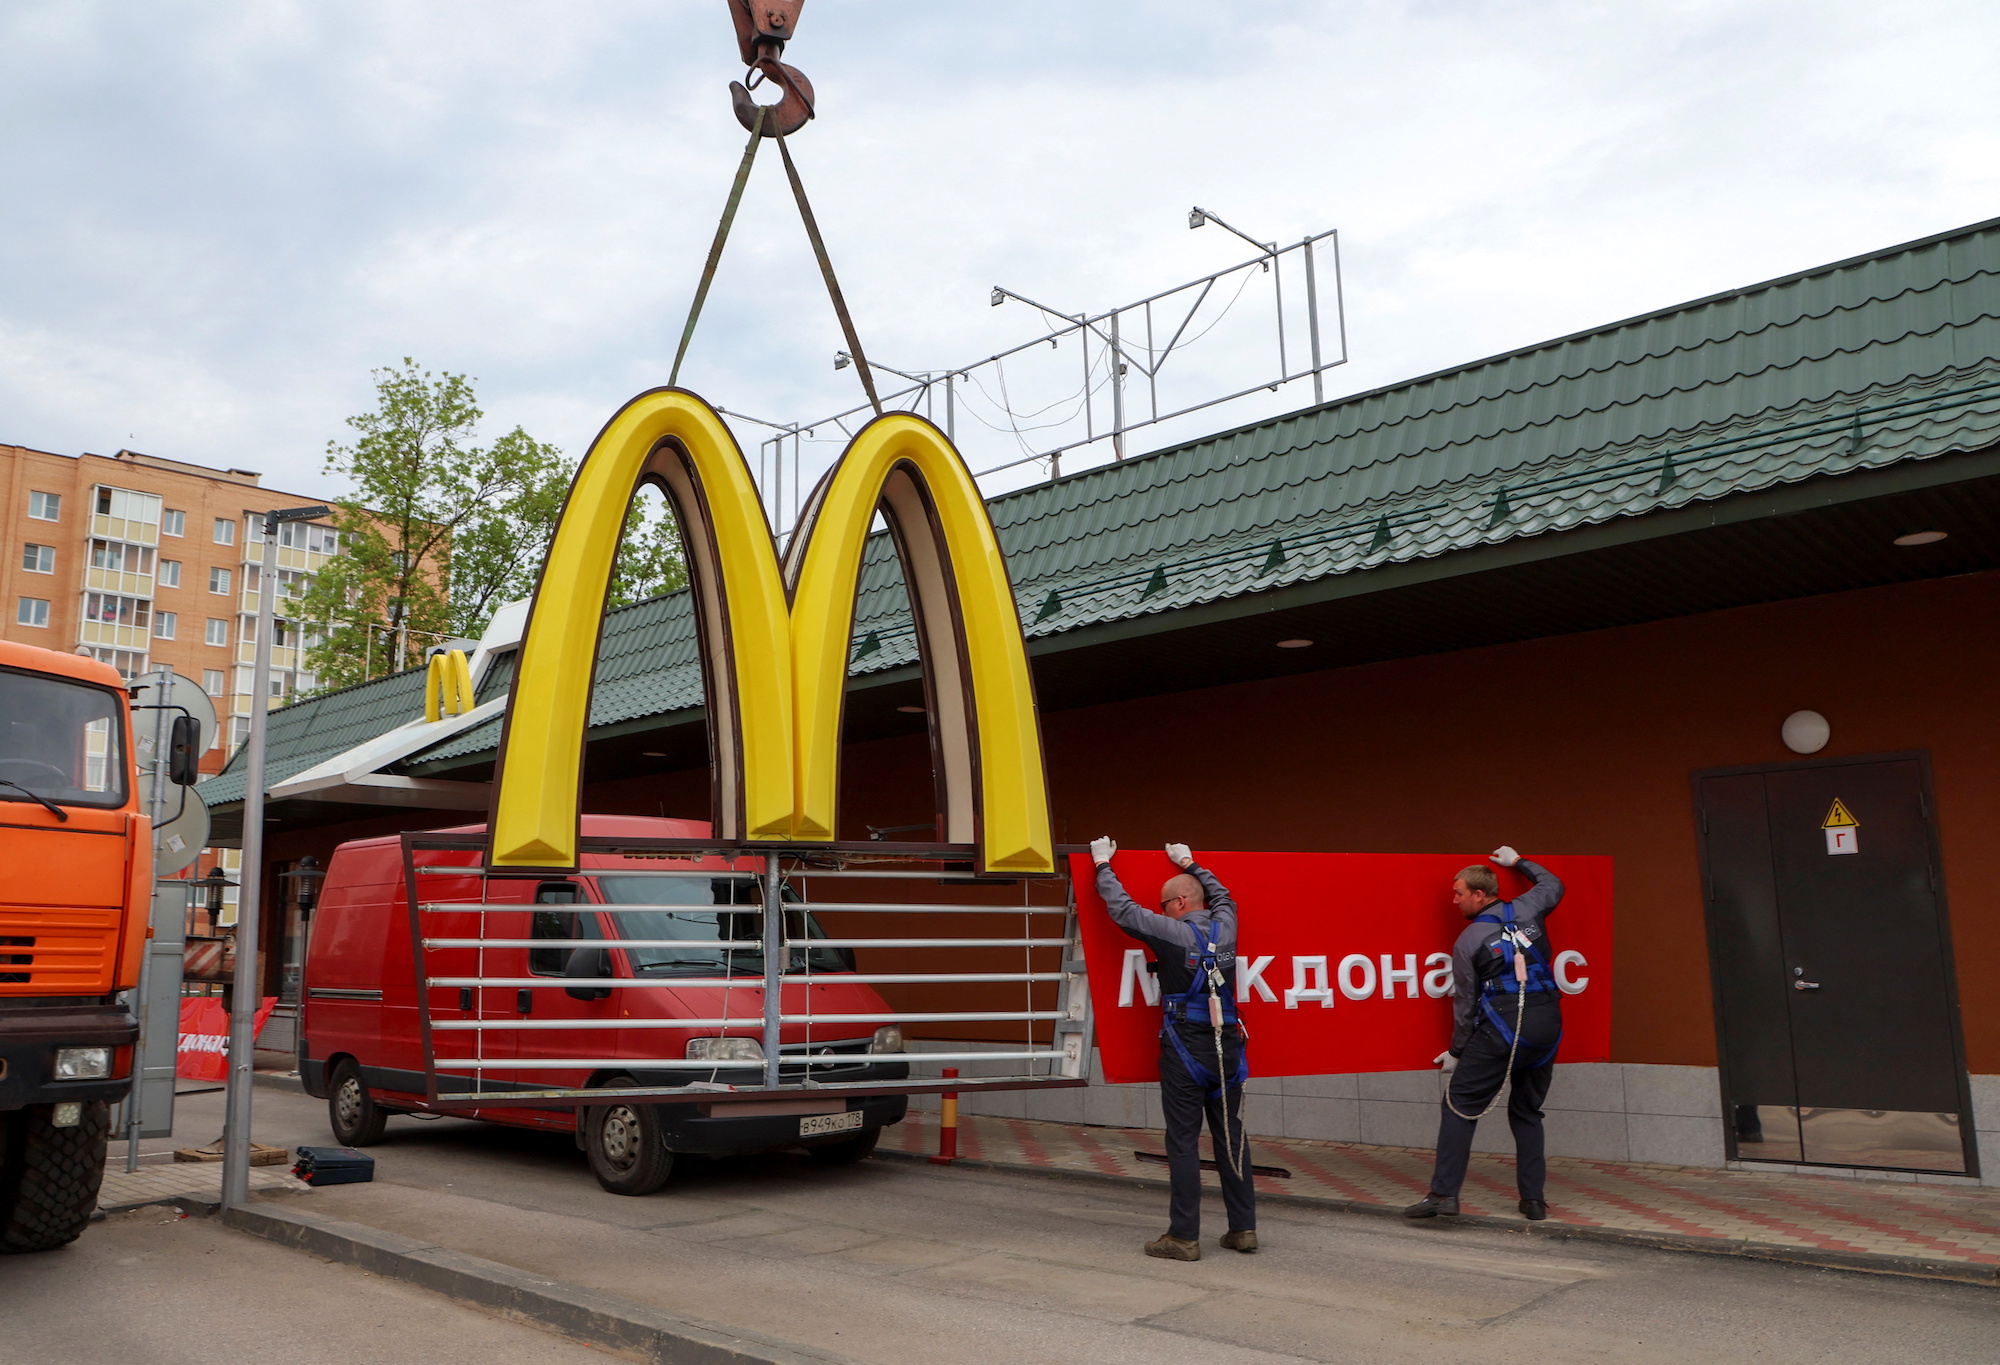 Workers use a crane to dismantle the McDonald's Golden Arches